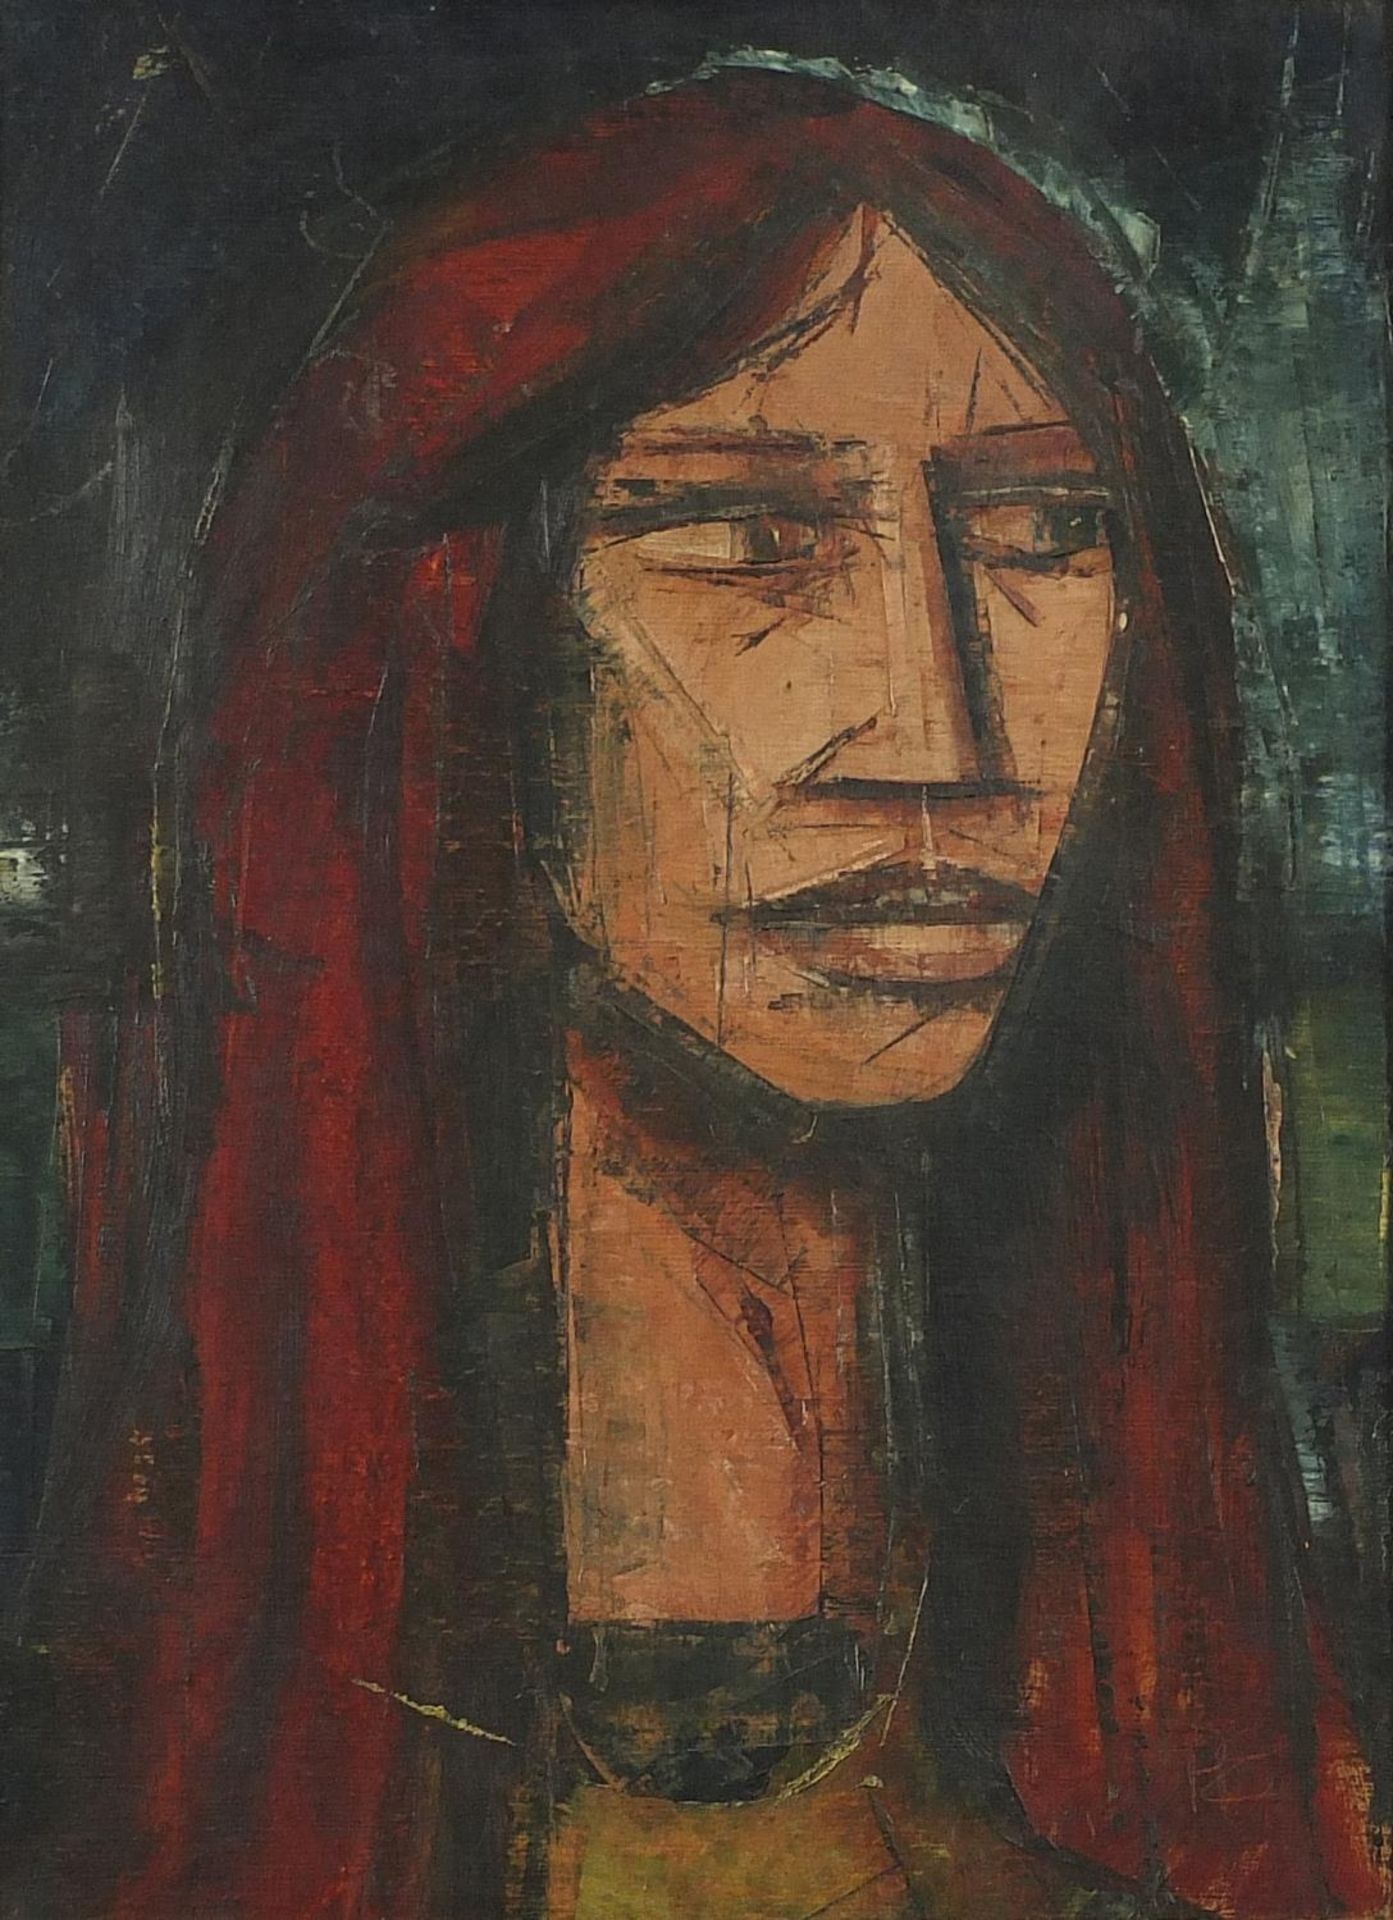 Head and shoulders portrait of a Native American, oil on panel, framed, 43cm x 32cm excluding the